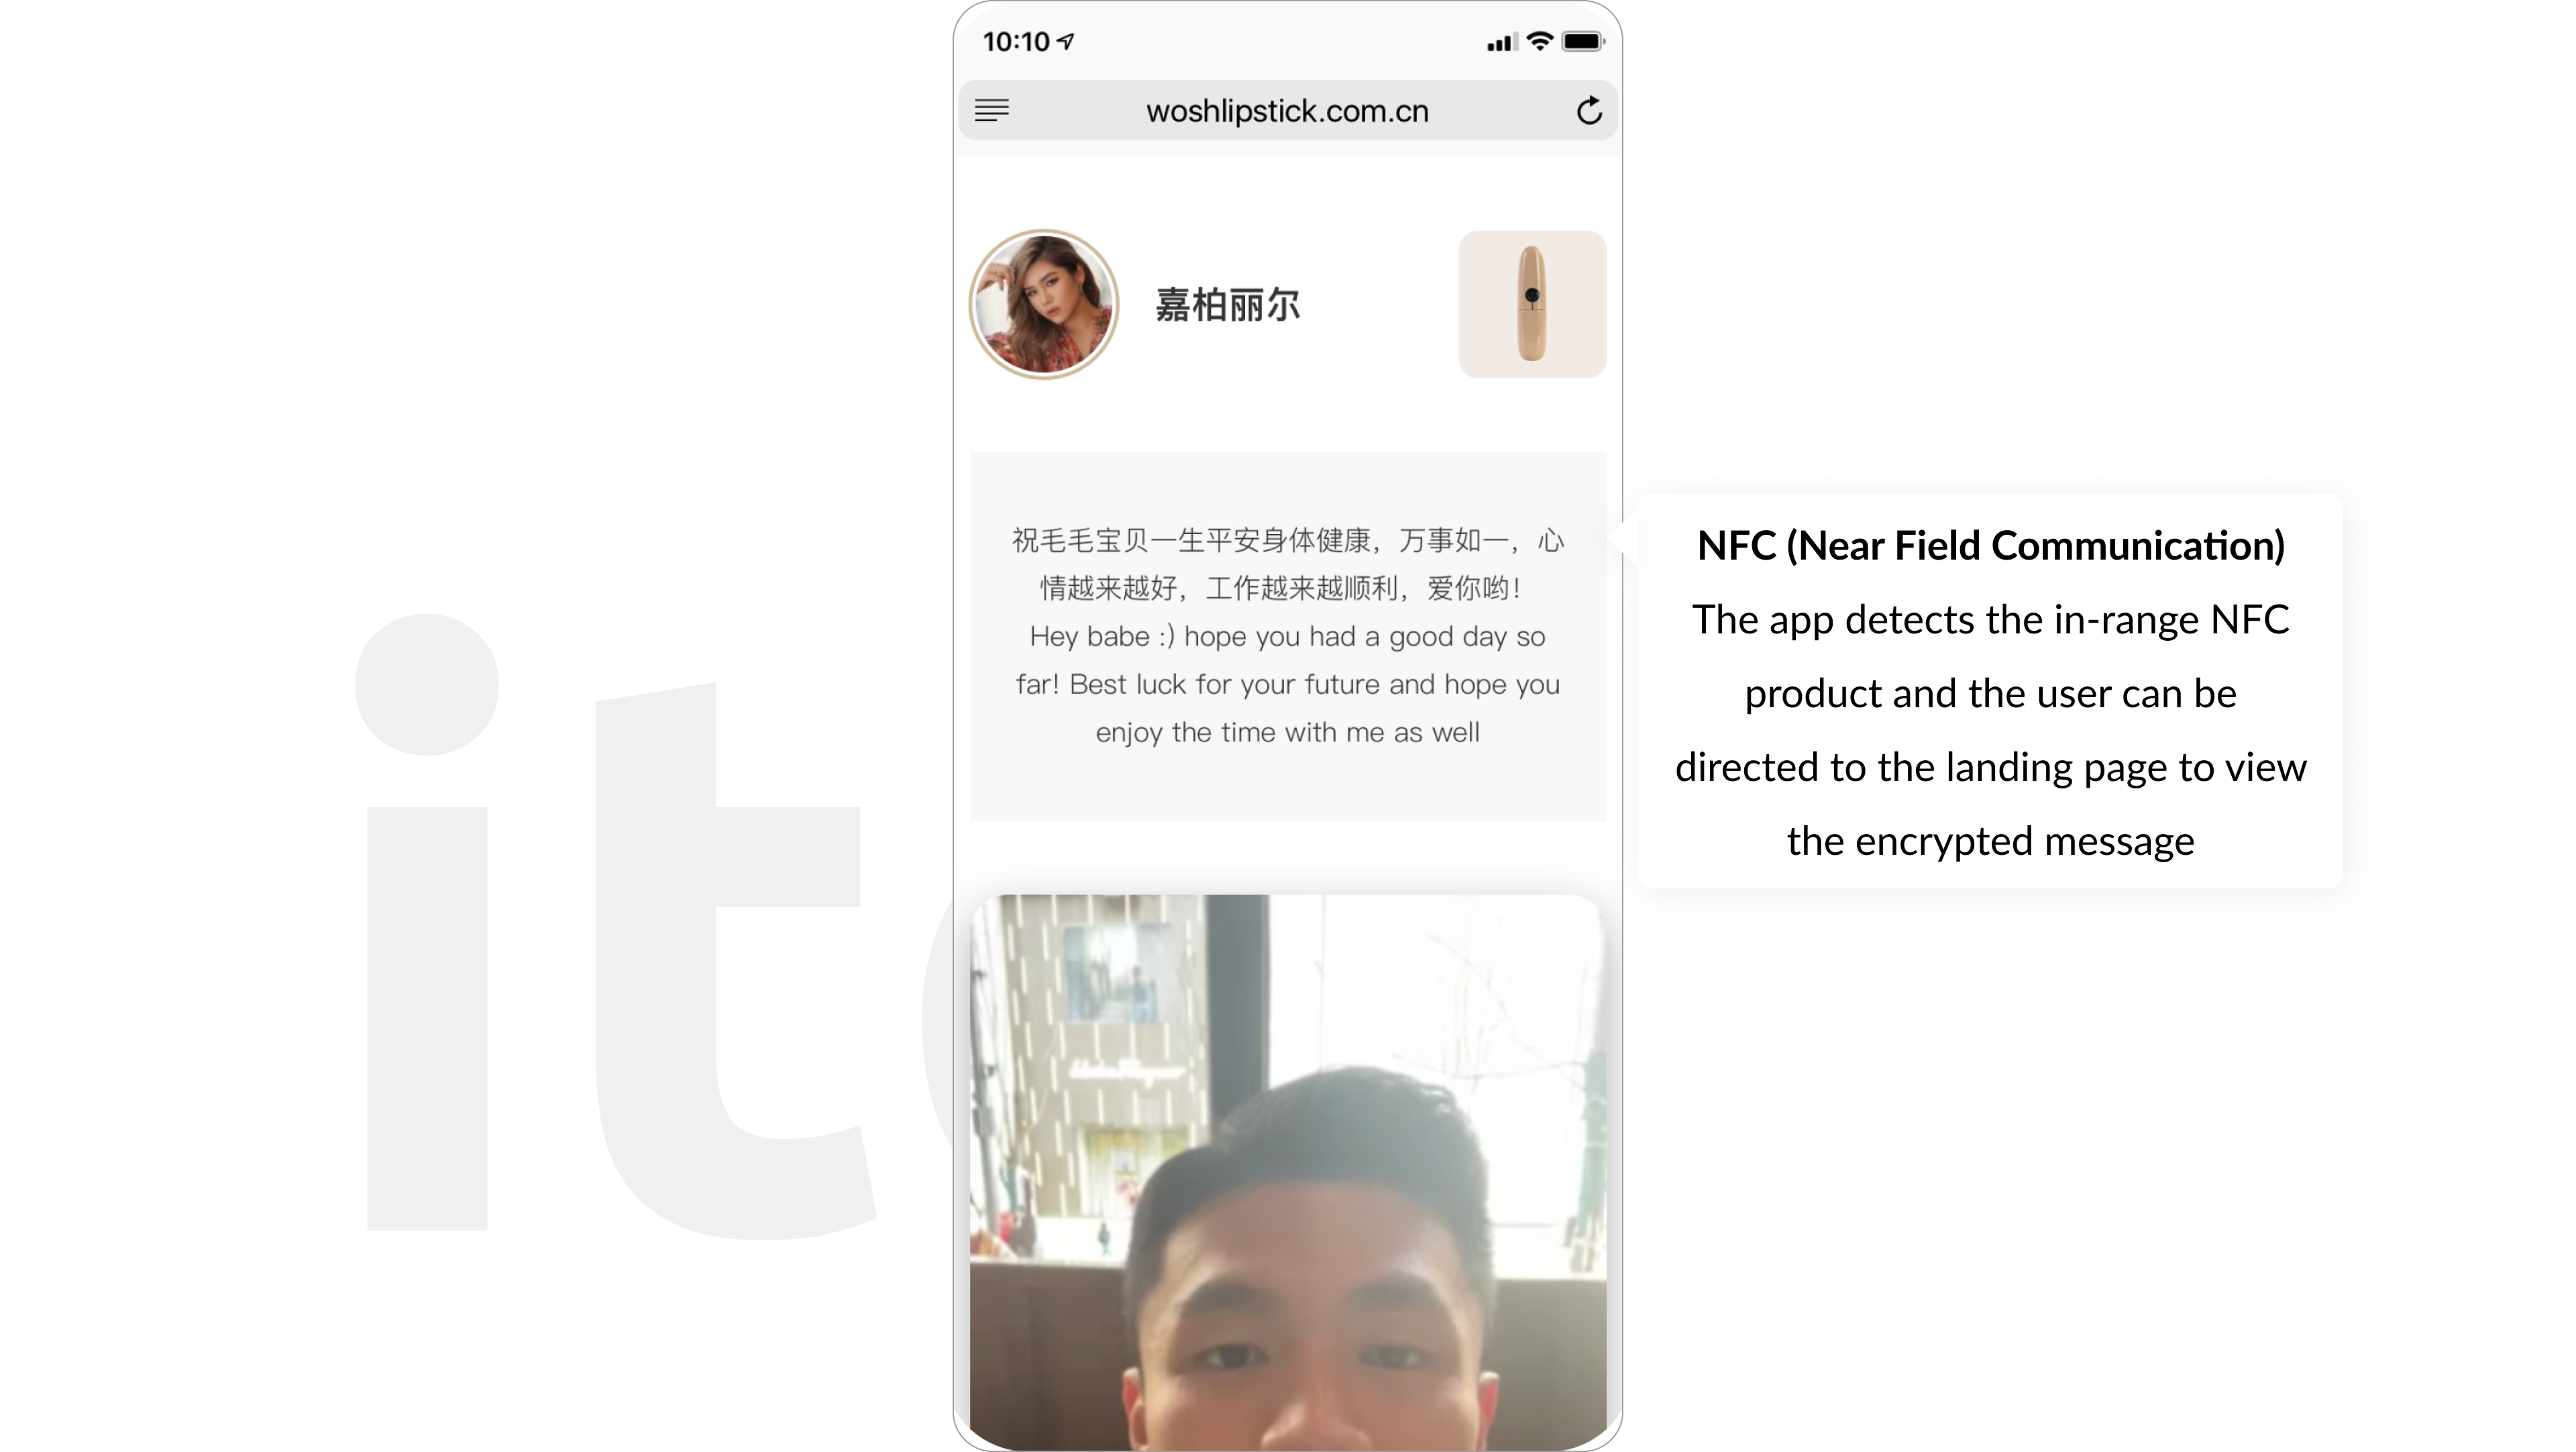 Landing page of the encrypted message in the YiZhiJi lipstick via NFC technology